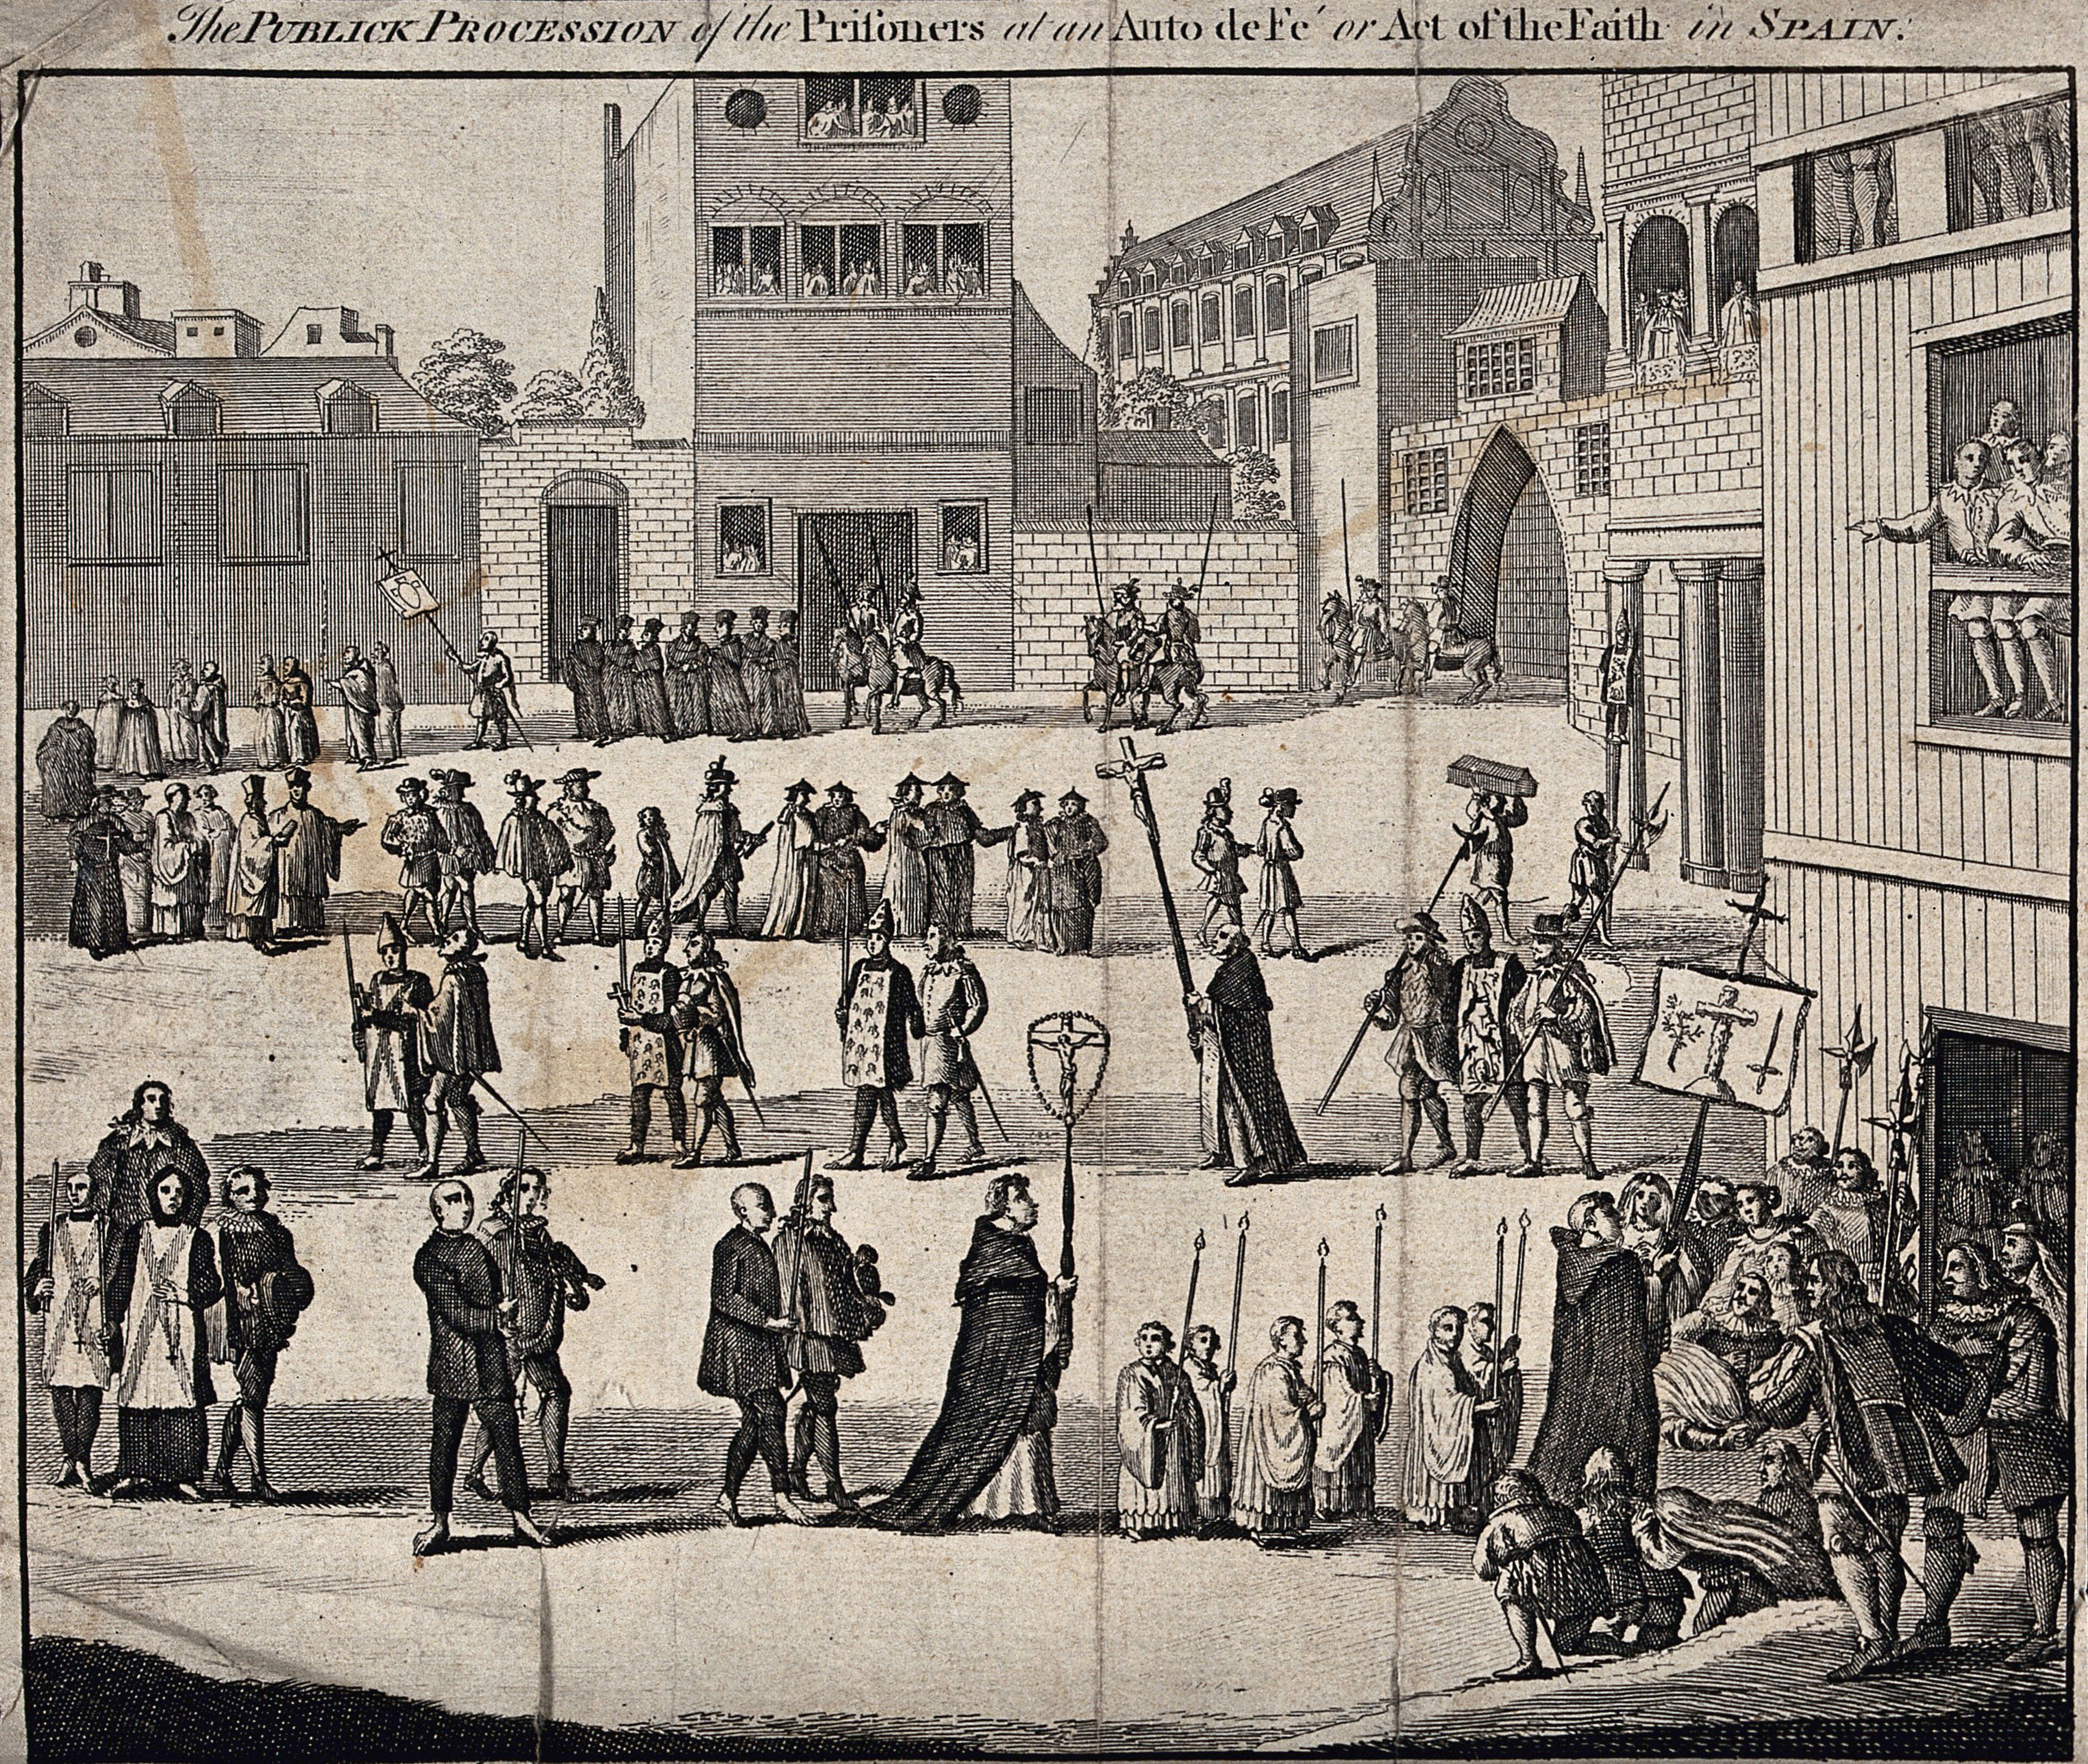 An auto-da-fé in Spain: the accused are led in procession by the Inquisitors to their trial. Engraving, 1749.